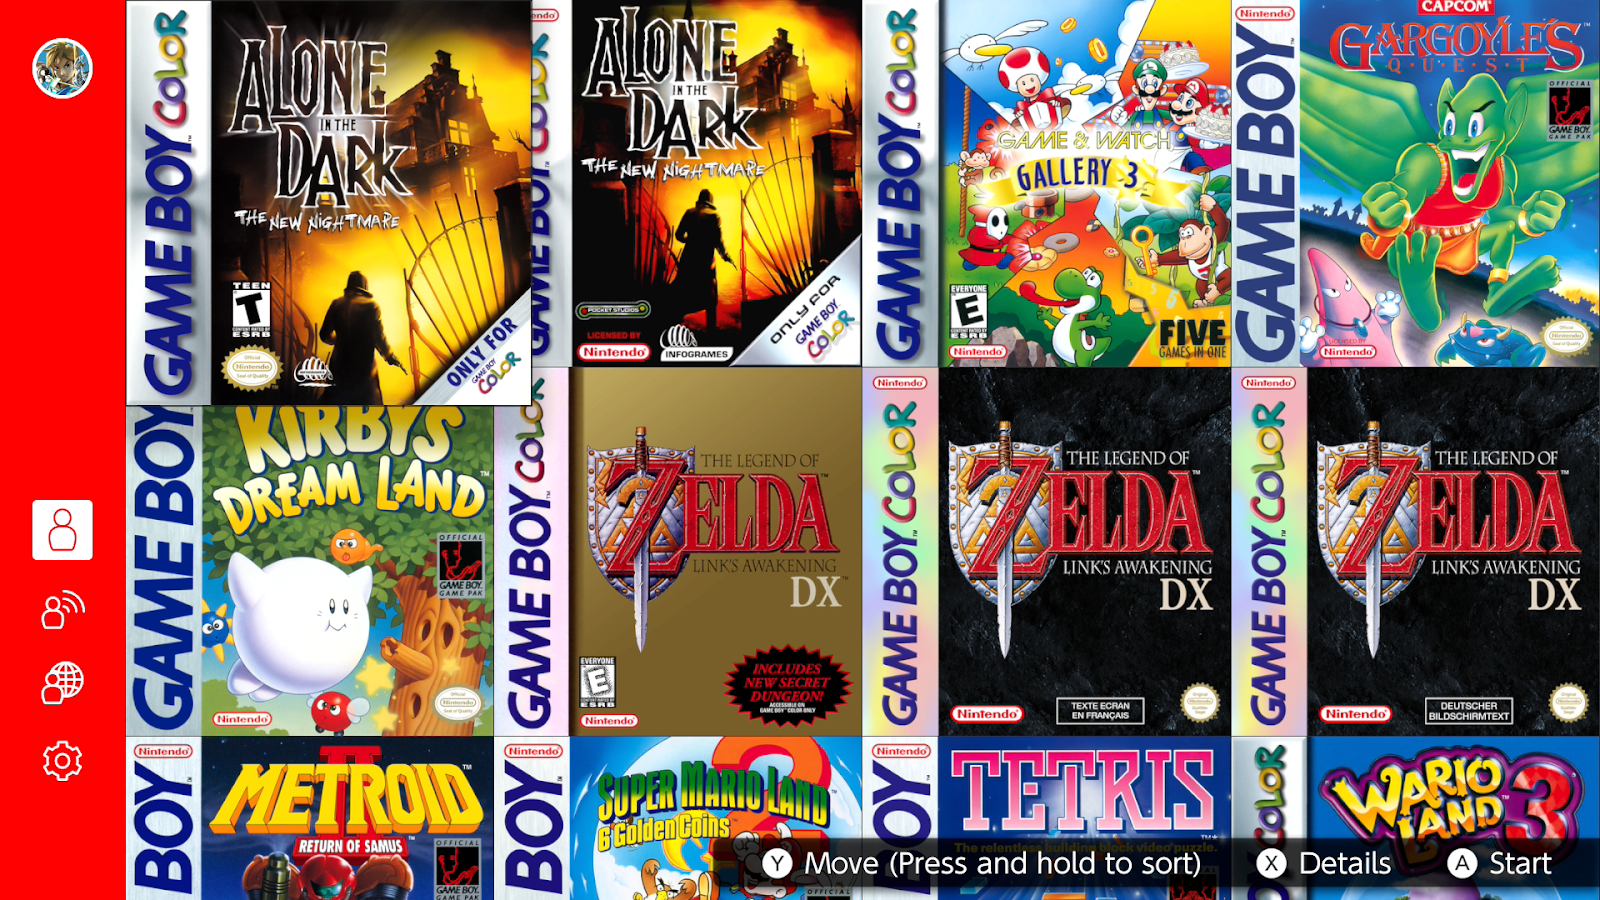 Game Boy and Game Boy Color titles headed to Nintendo Switch Online